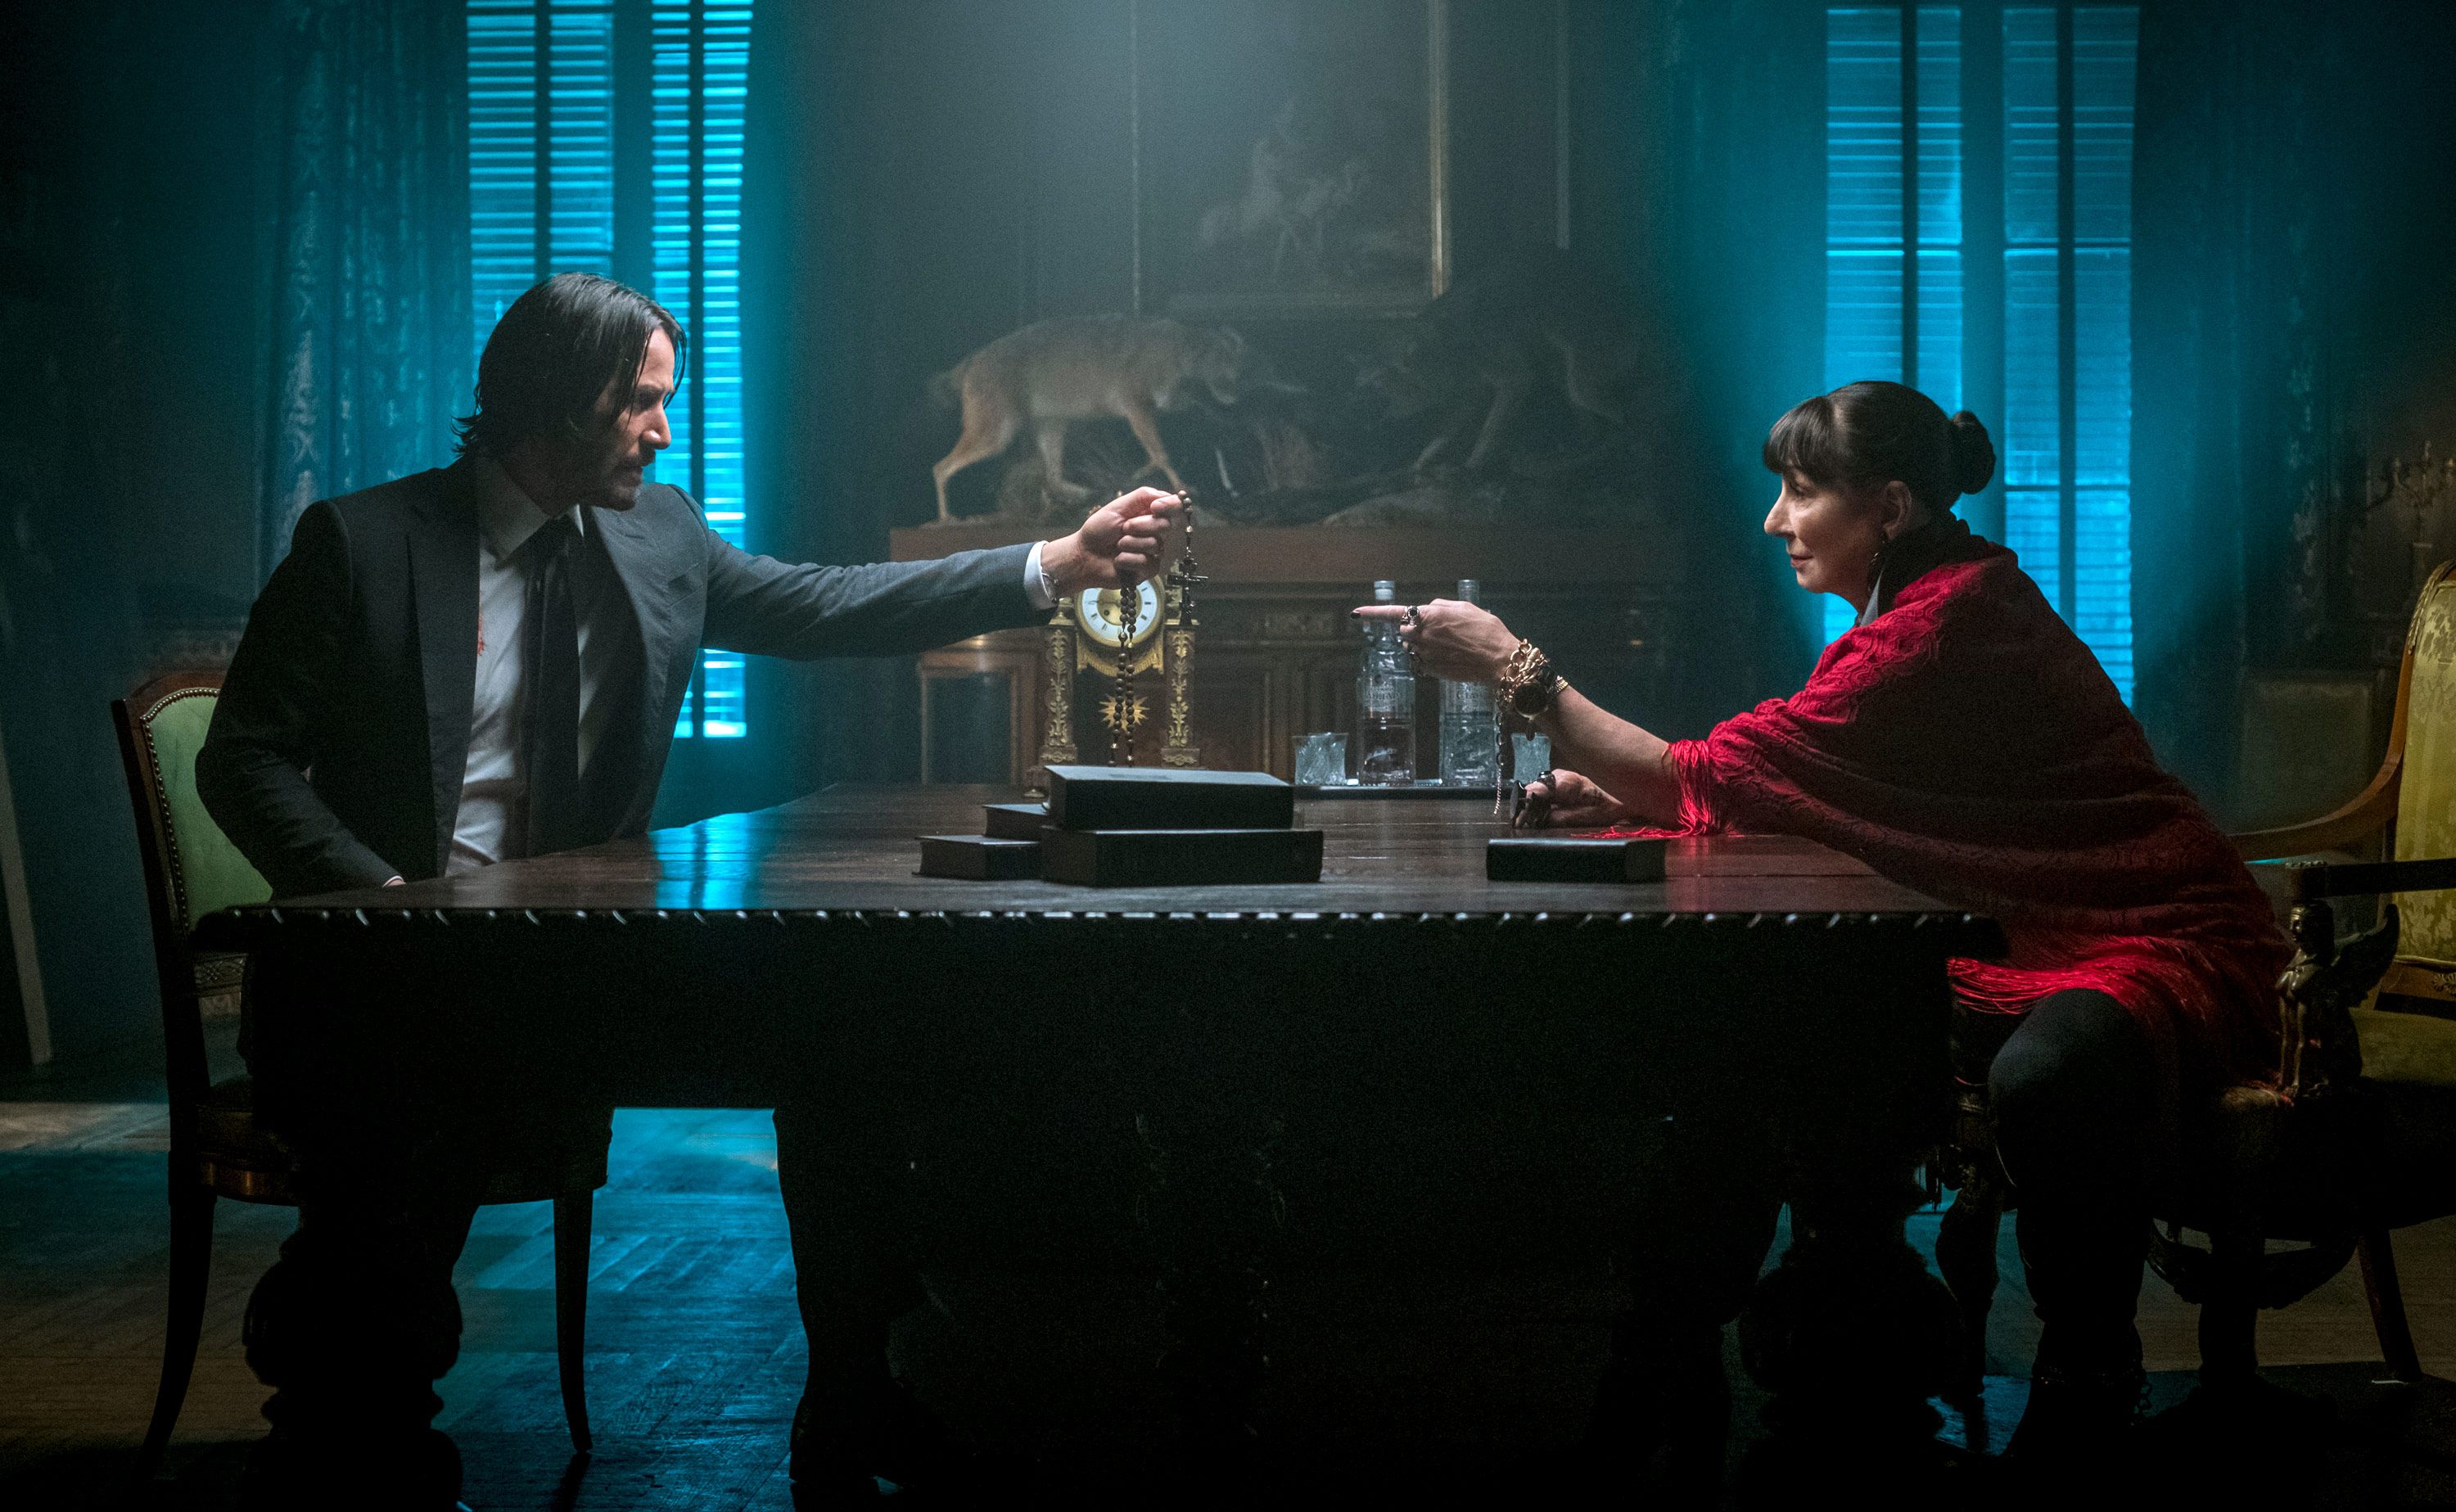 John Wick: Chapter 4' Release Date, Cast, Plot, Trailer, and More